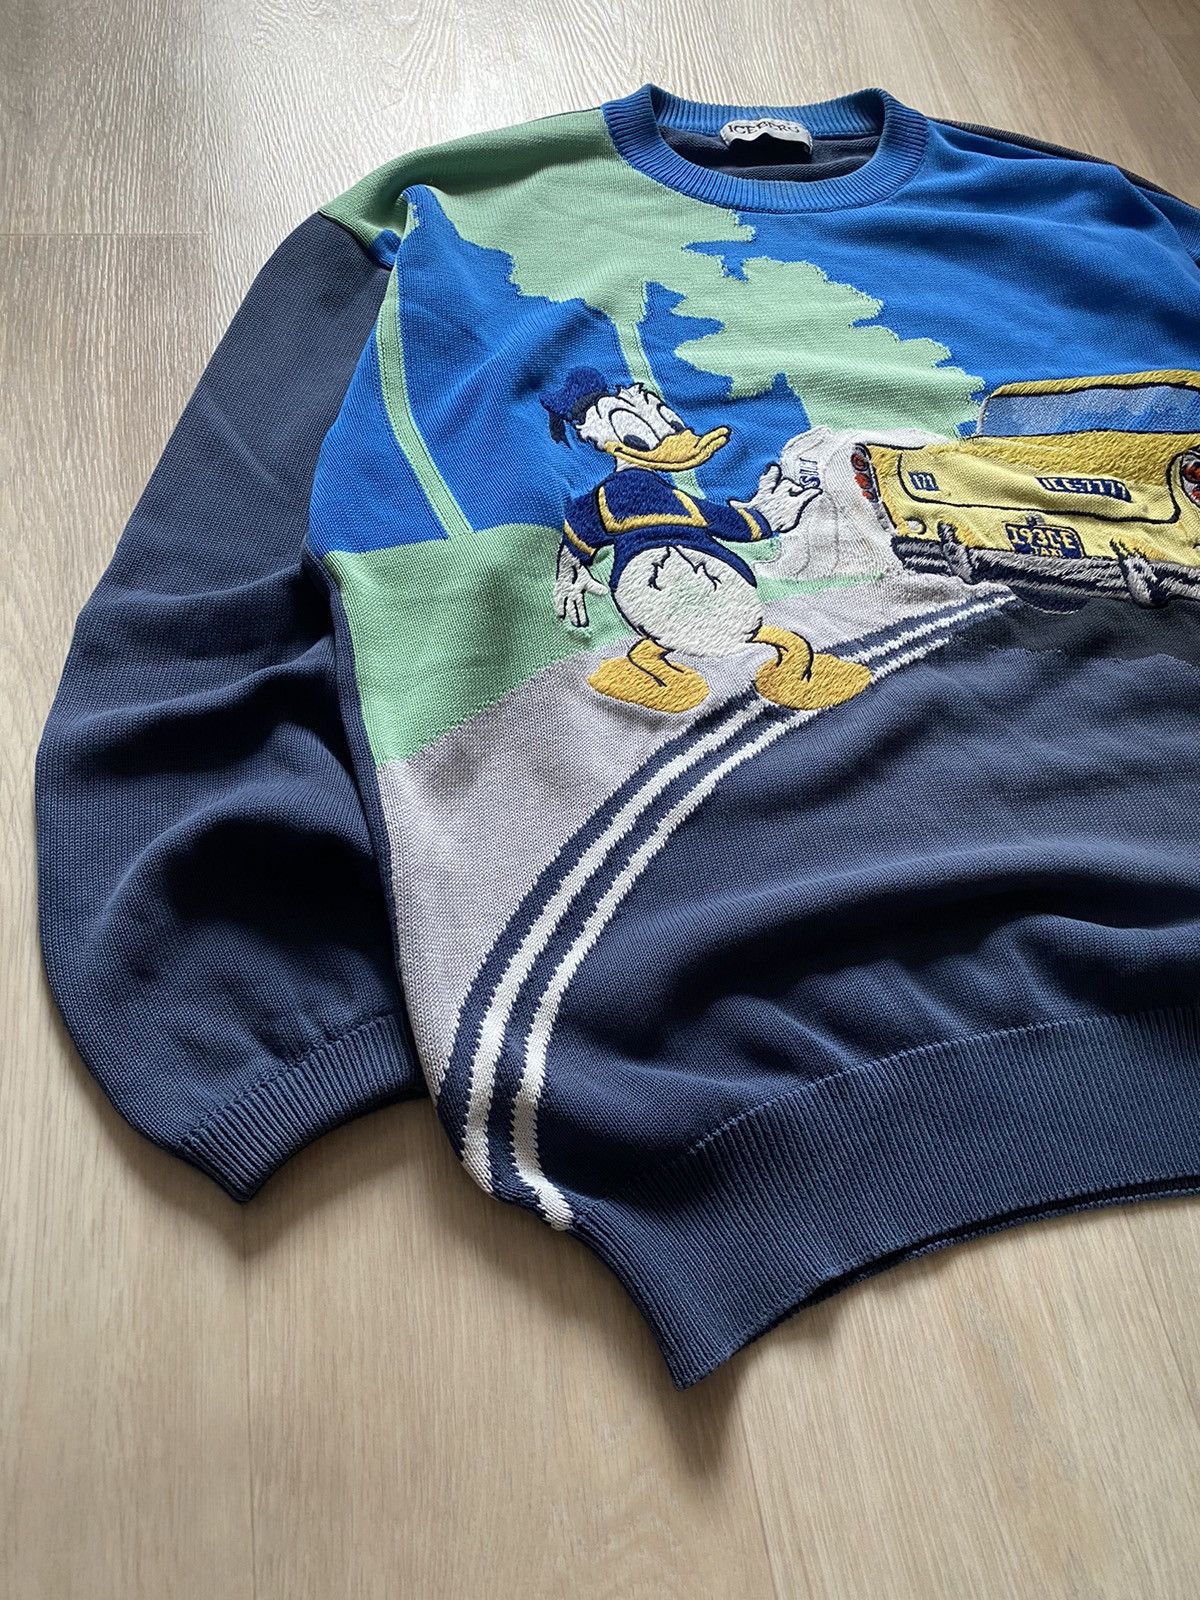 Very Rare Iceberg History Sweater Vintage 1992 Disney 'Donald Duck' Size US XL / EU 56 / 4 - 2 Preview